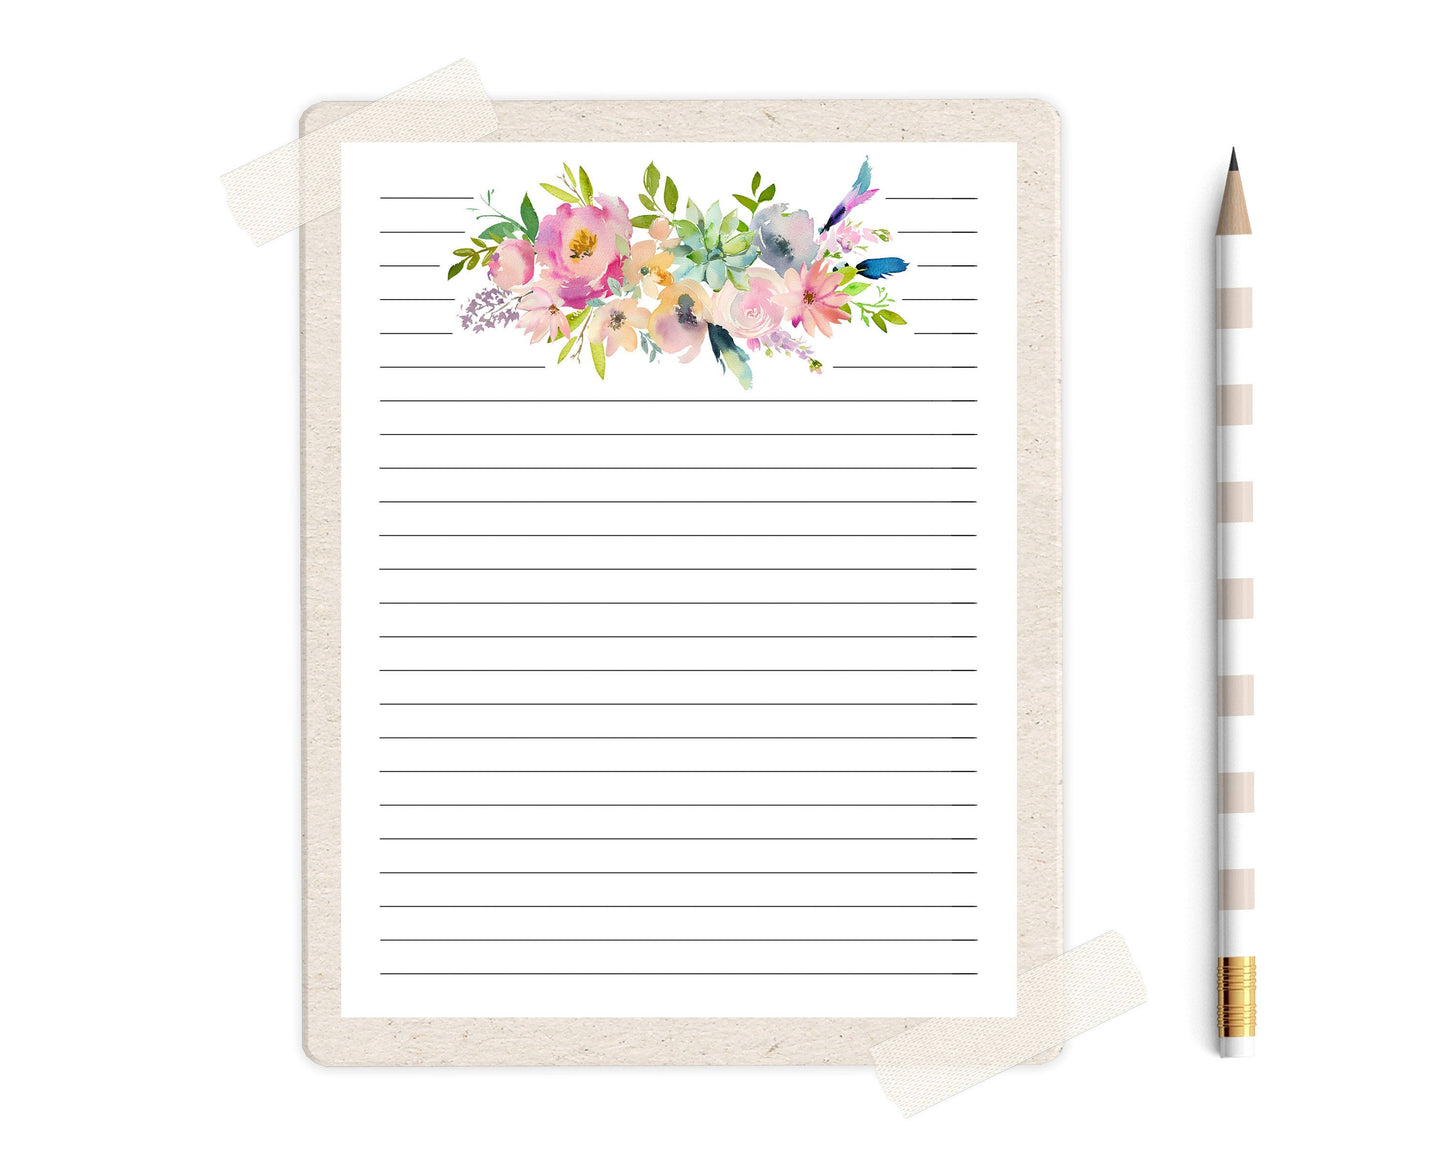 Bohemian Floral Bouquet Unlined & Lined Stationery Set Printable - Digital Download